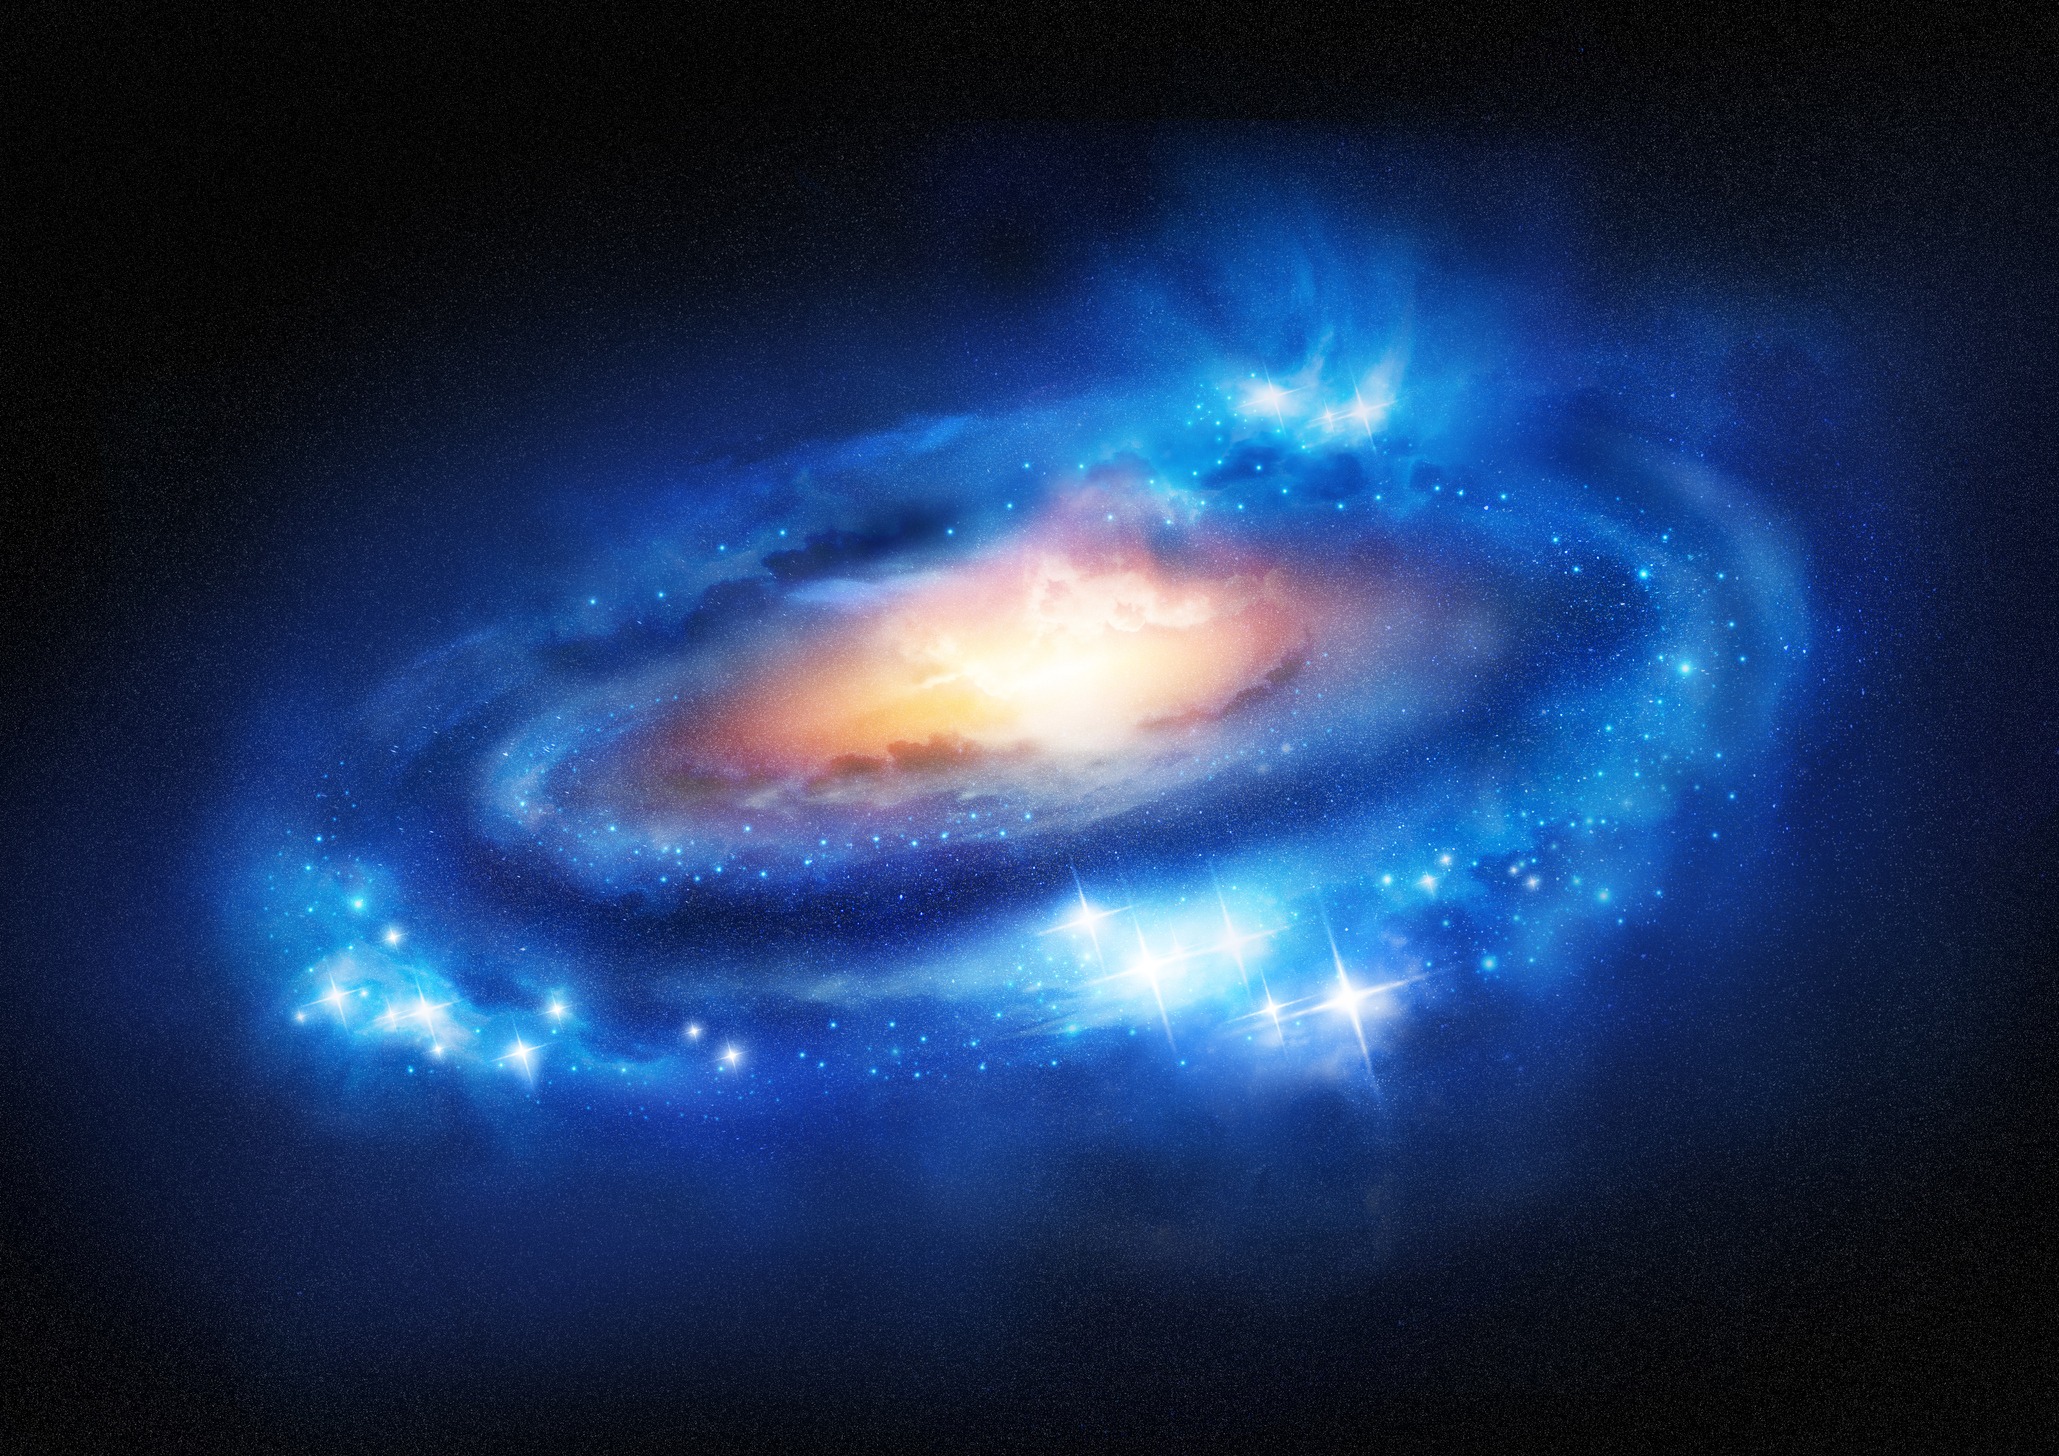 download the new for windows DIG - Deep In Galaxies